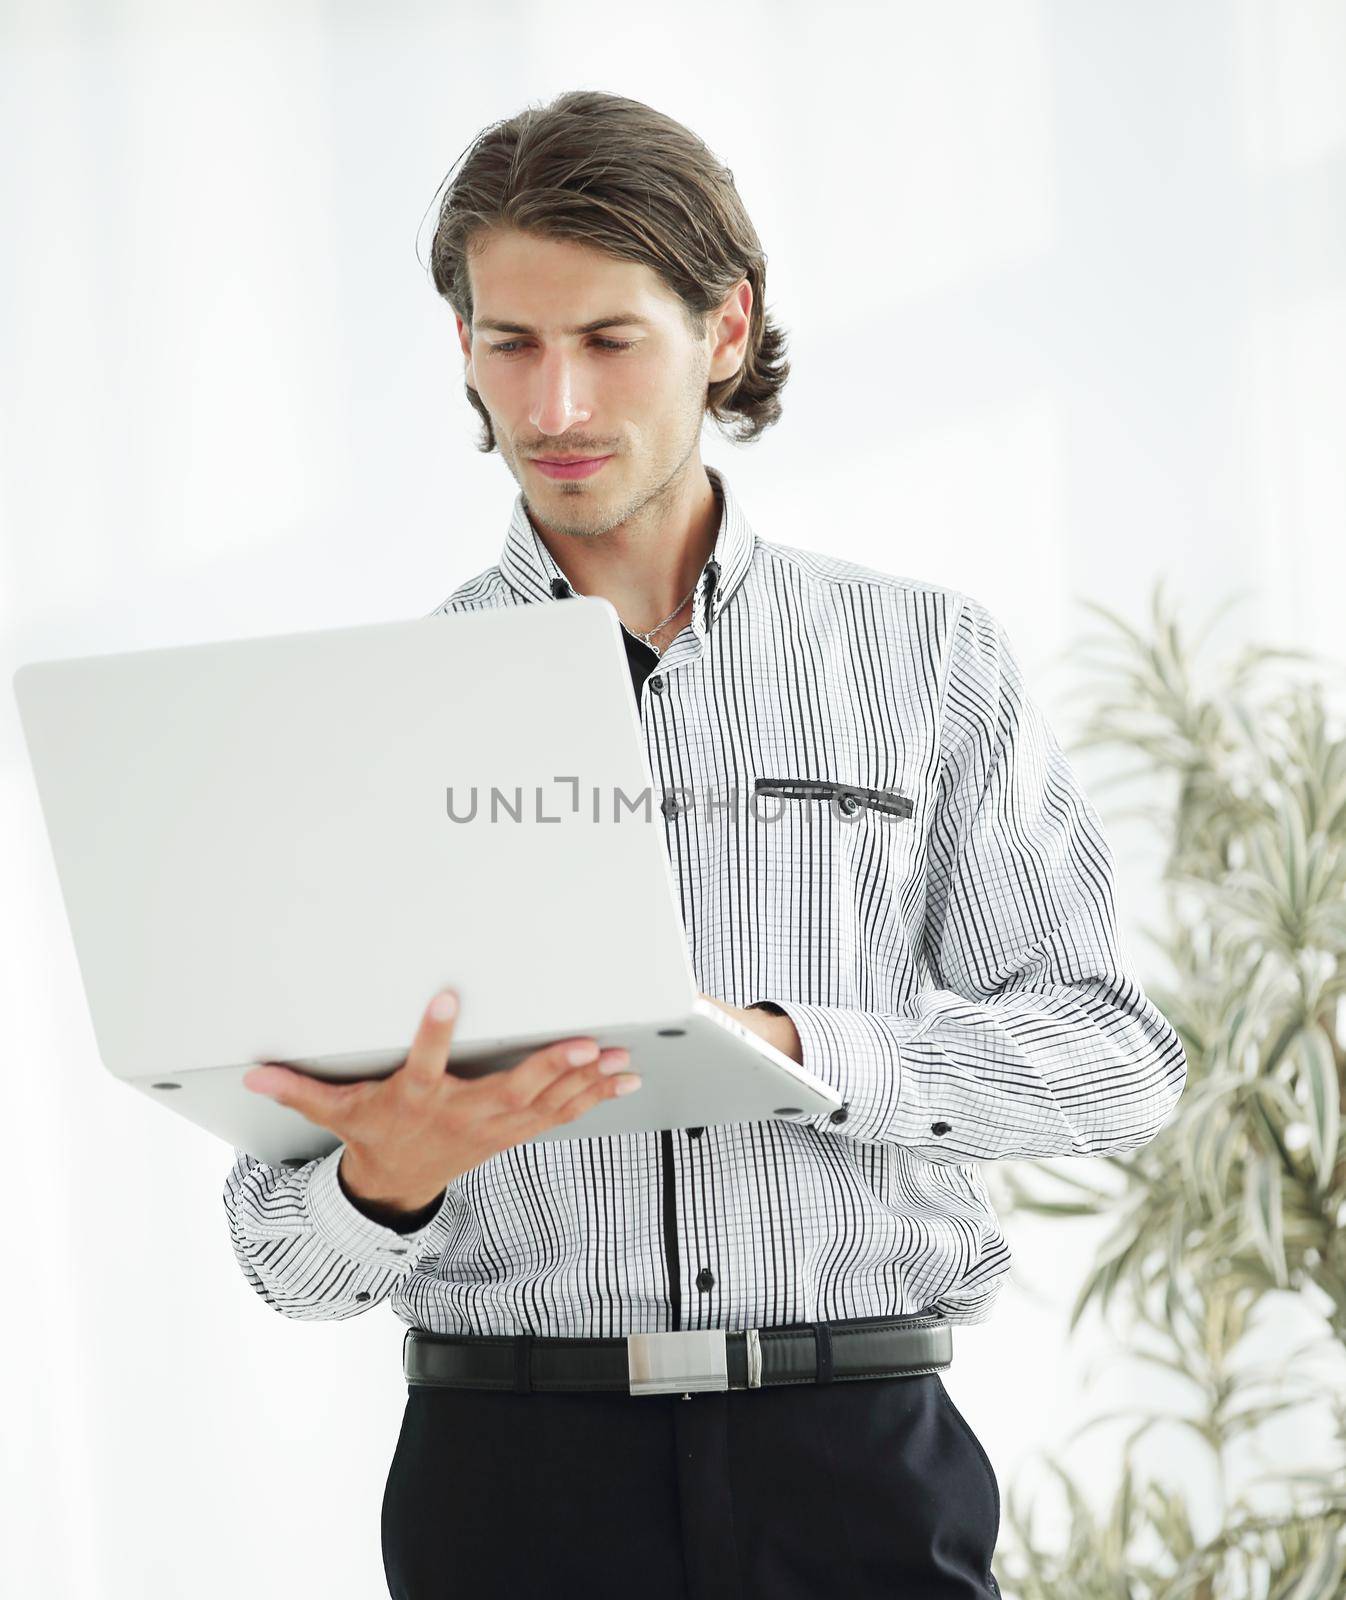 closeup.serious businessman working on laptop standing in office.